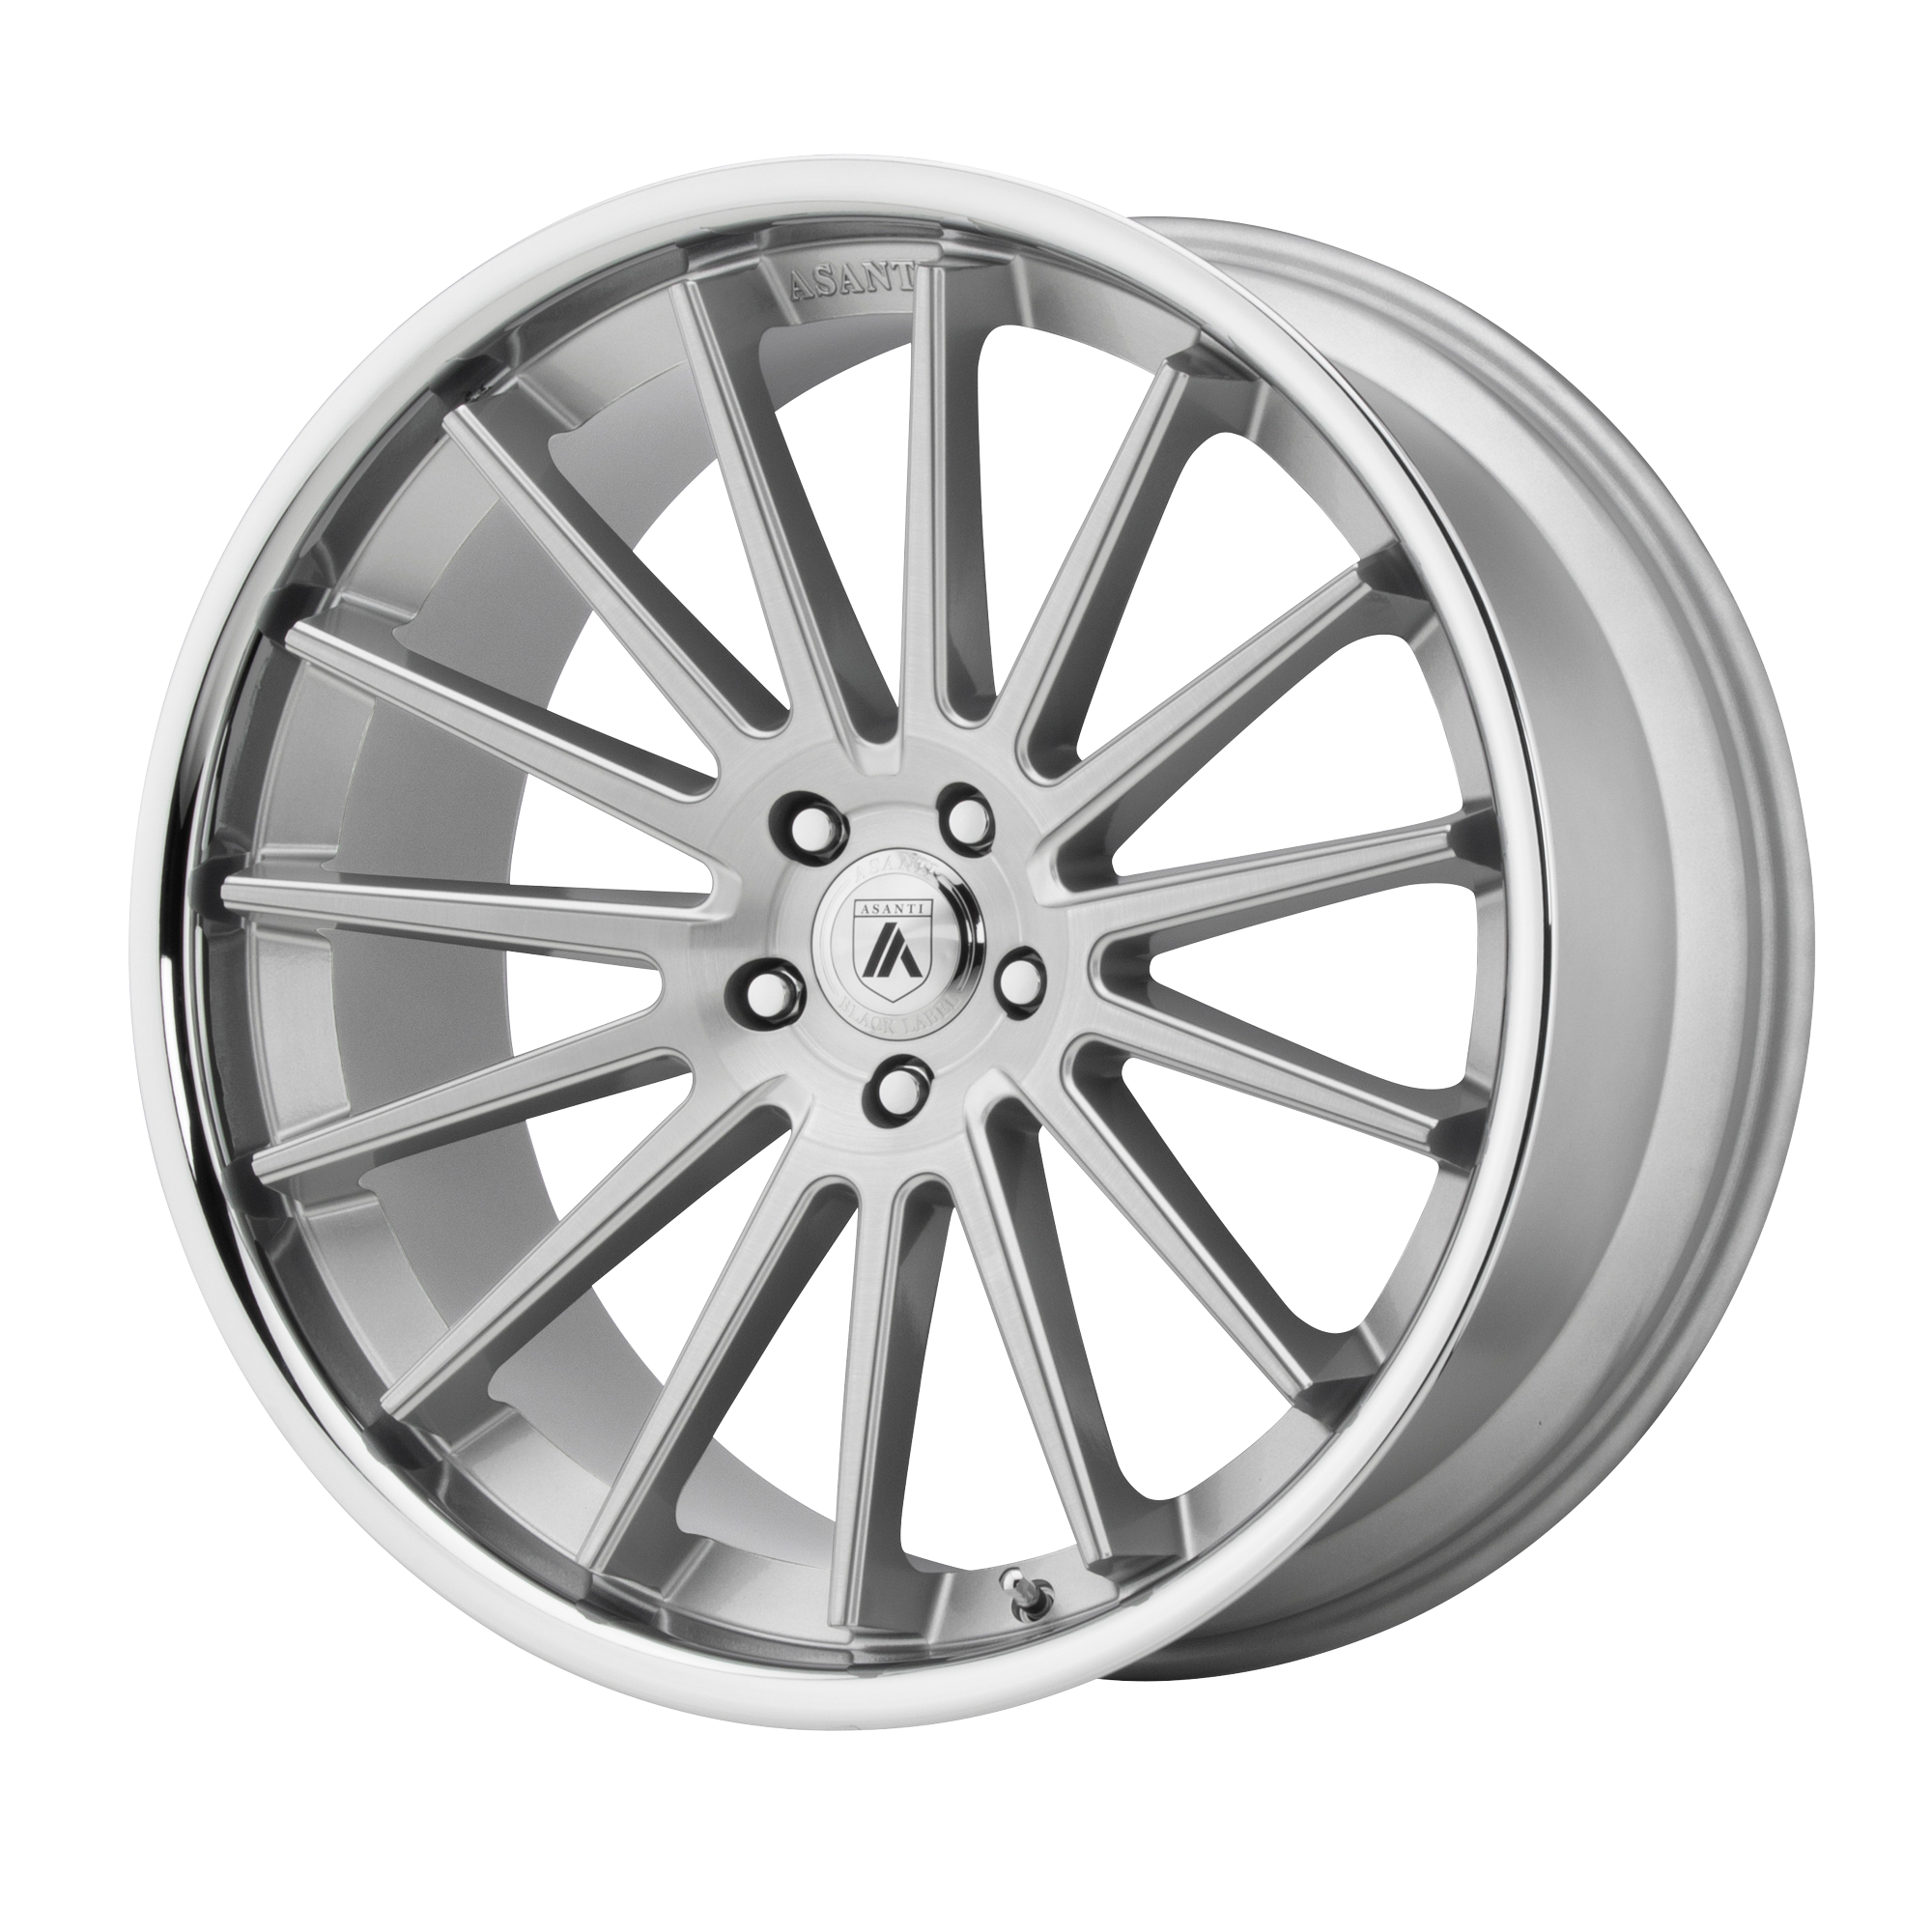 BETA 20x10.5 5x115.00 BRUSHED SILVER W/ CHROME LIP (20 mm) - Tires and Engine Performance